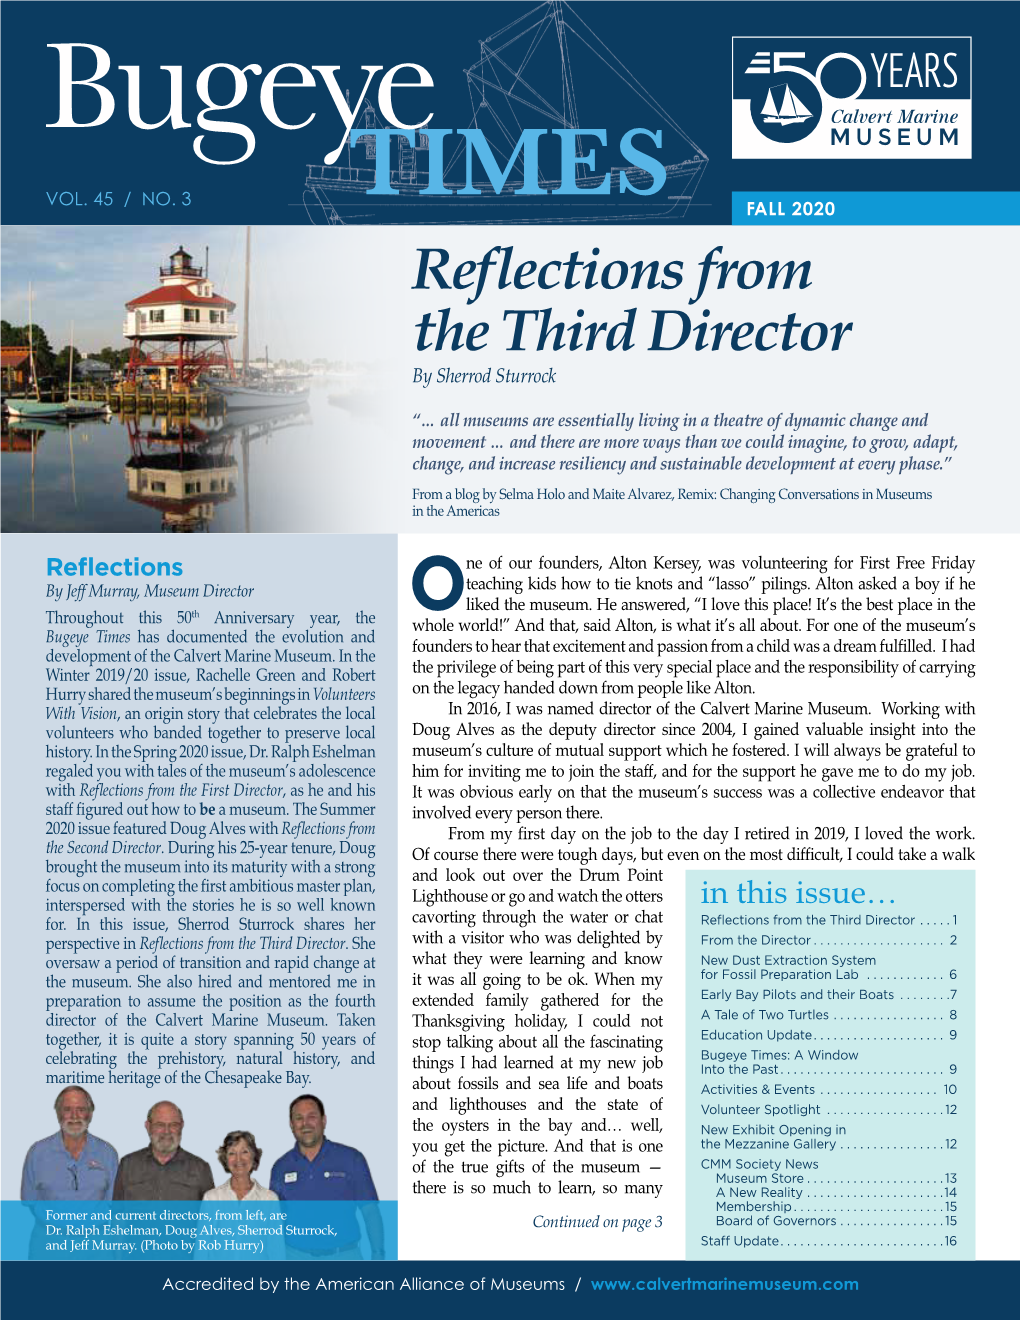 FALL 2020 Reflections from the Third Director by Sherrod Sturrock